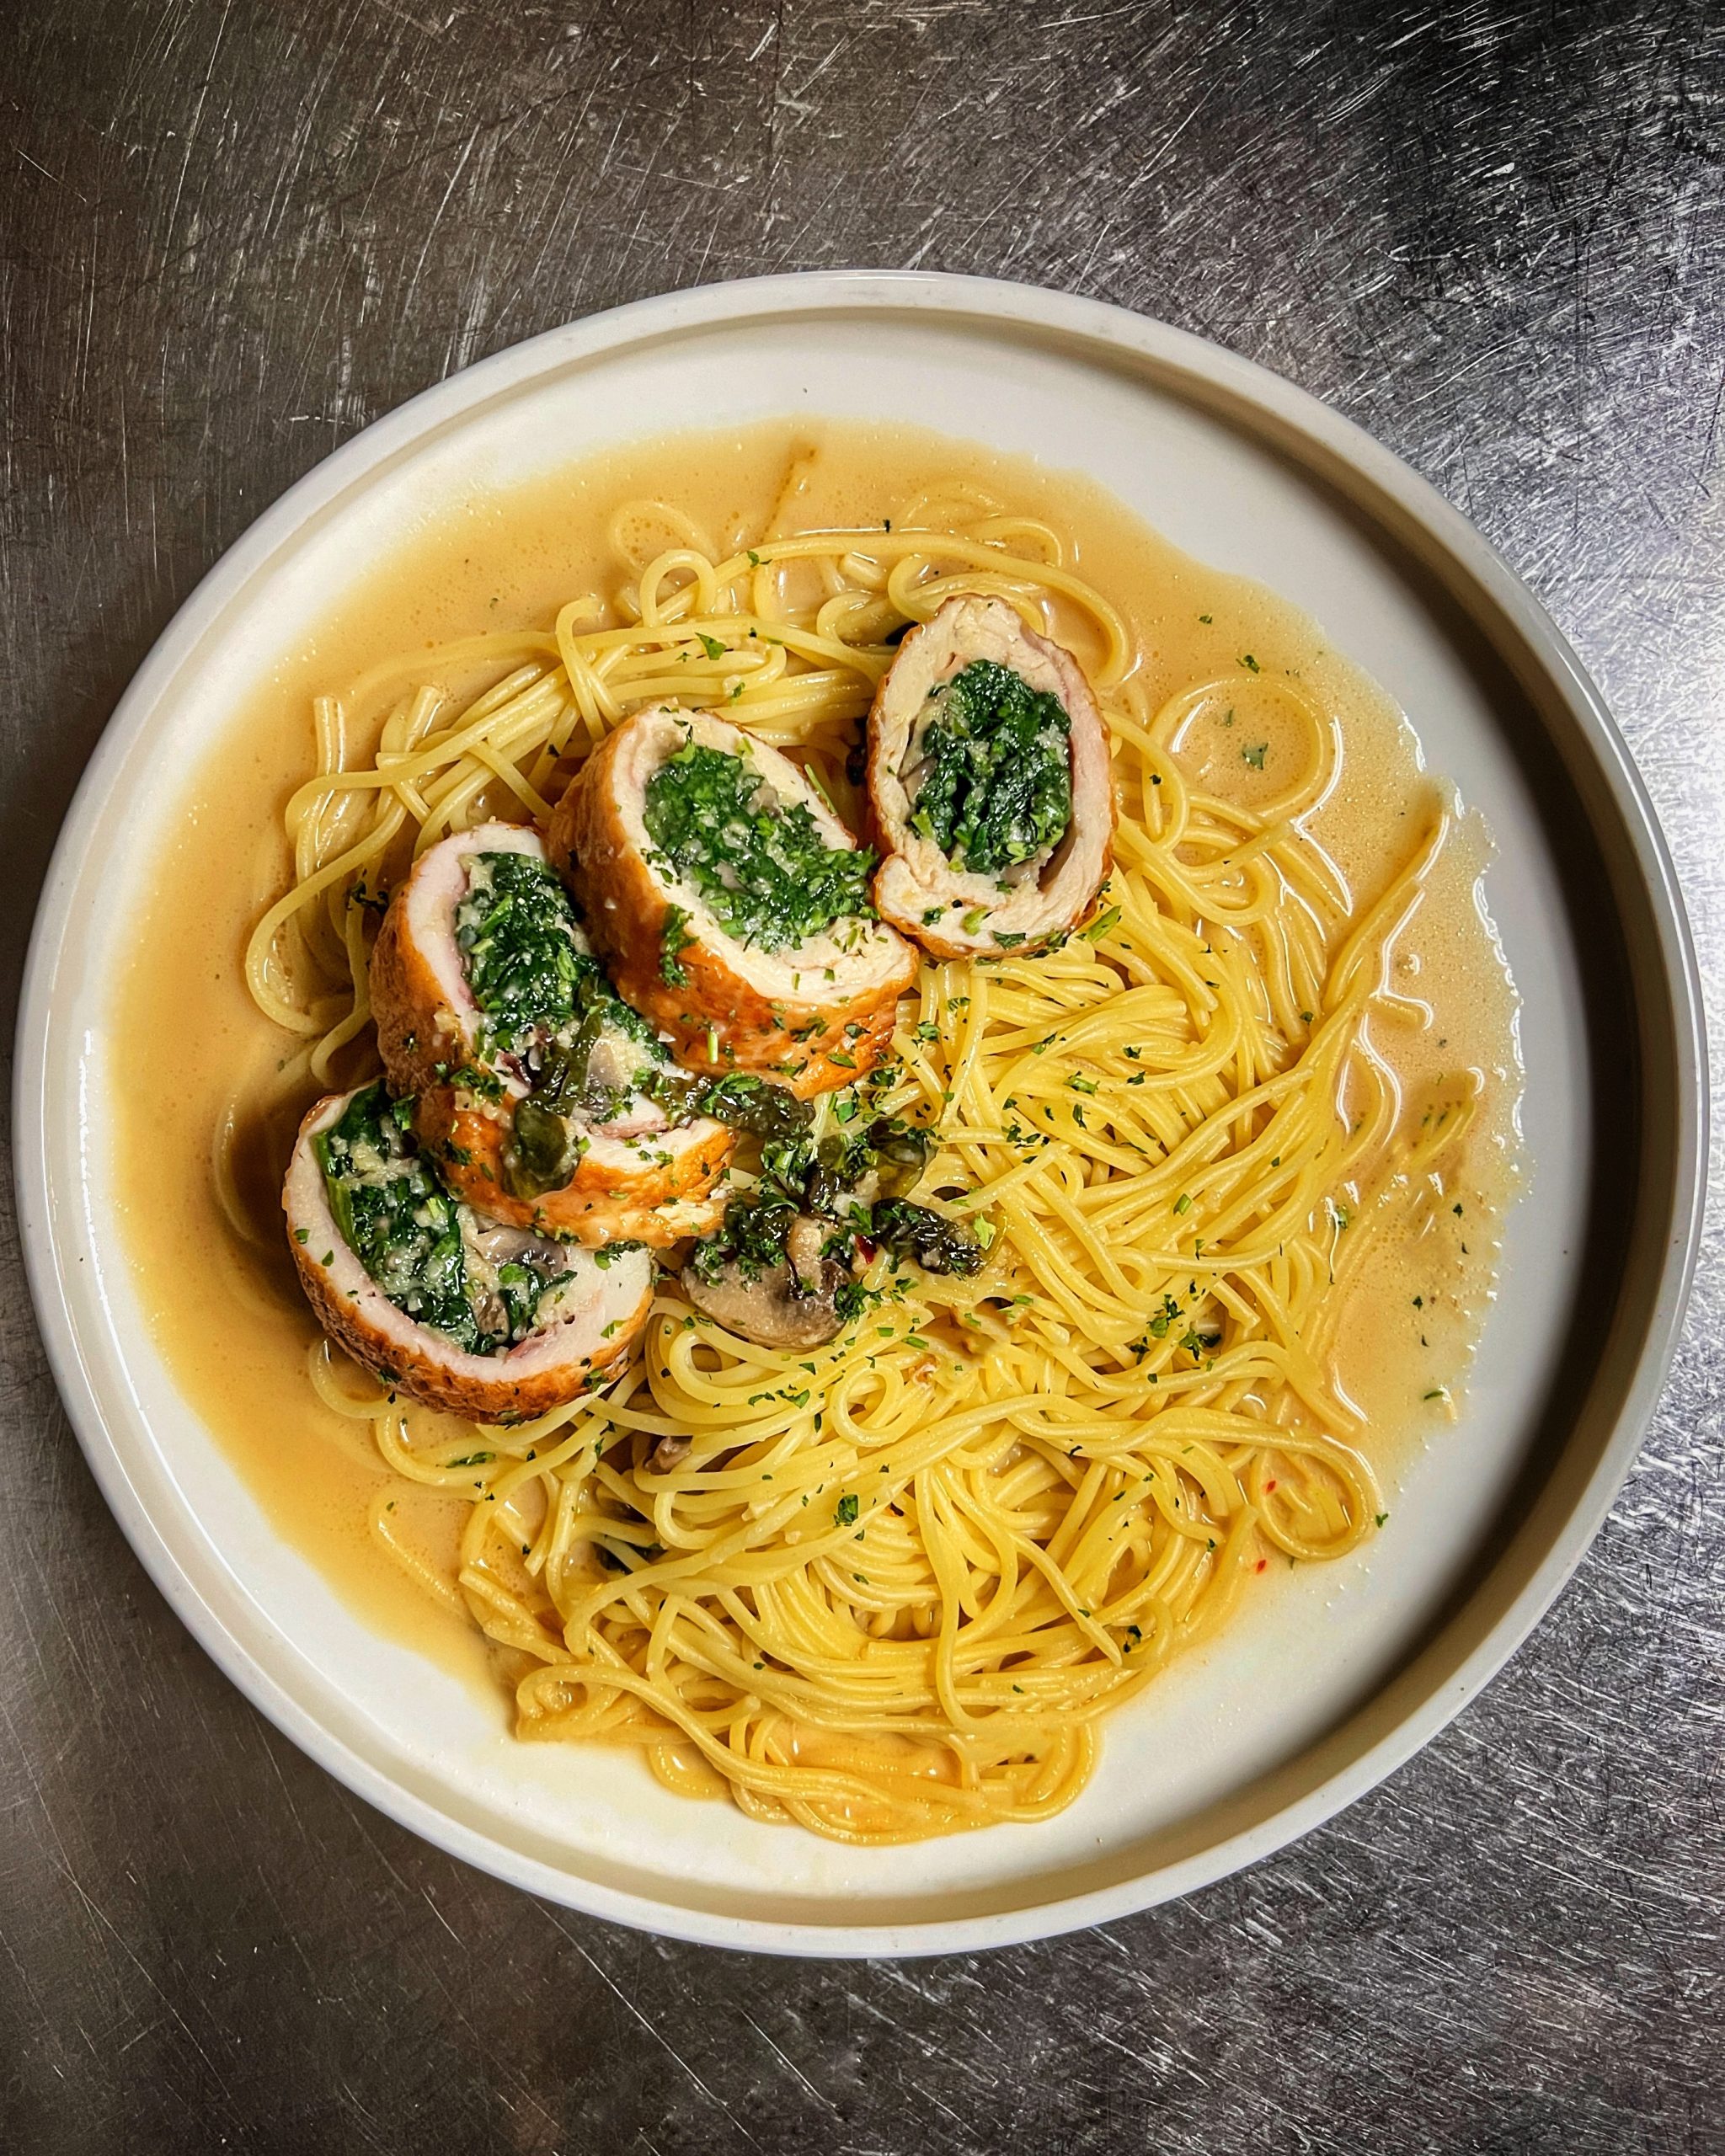 Spaghetti with stuffed chicken on round dinner plate